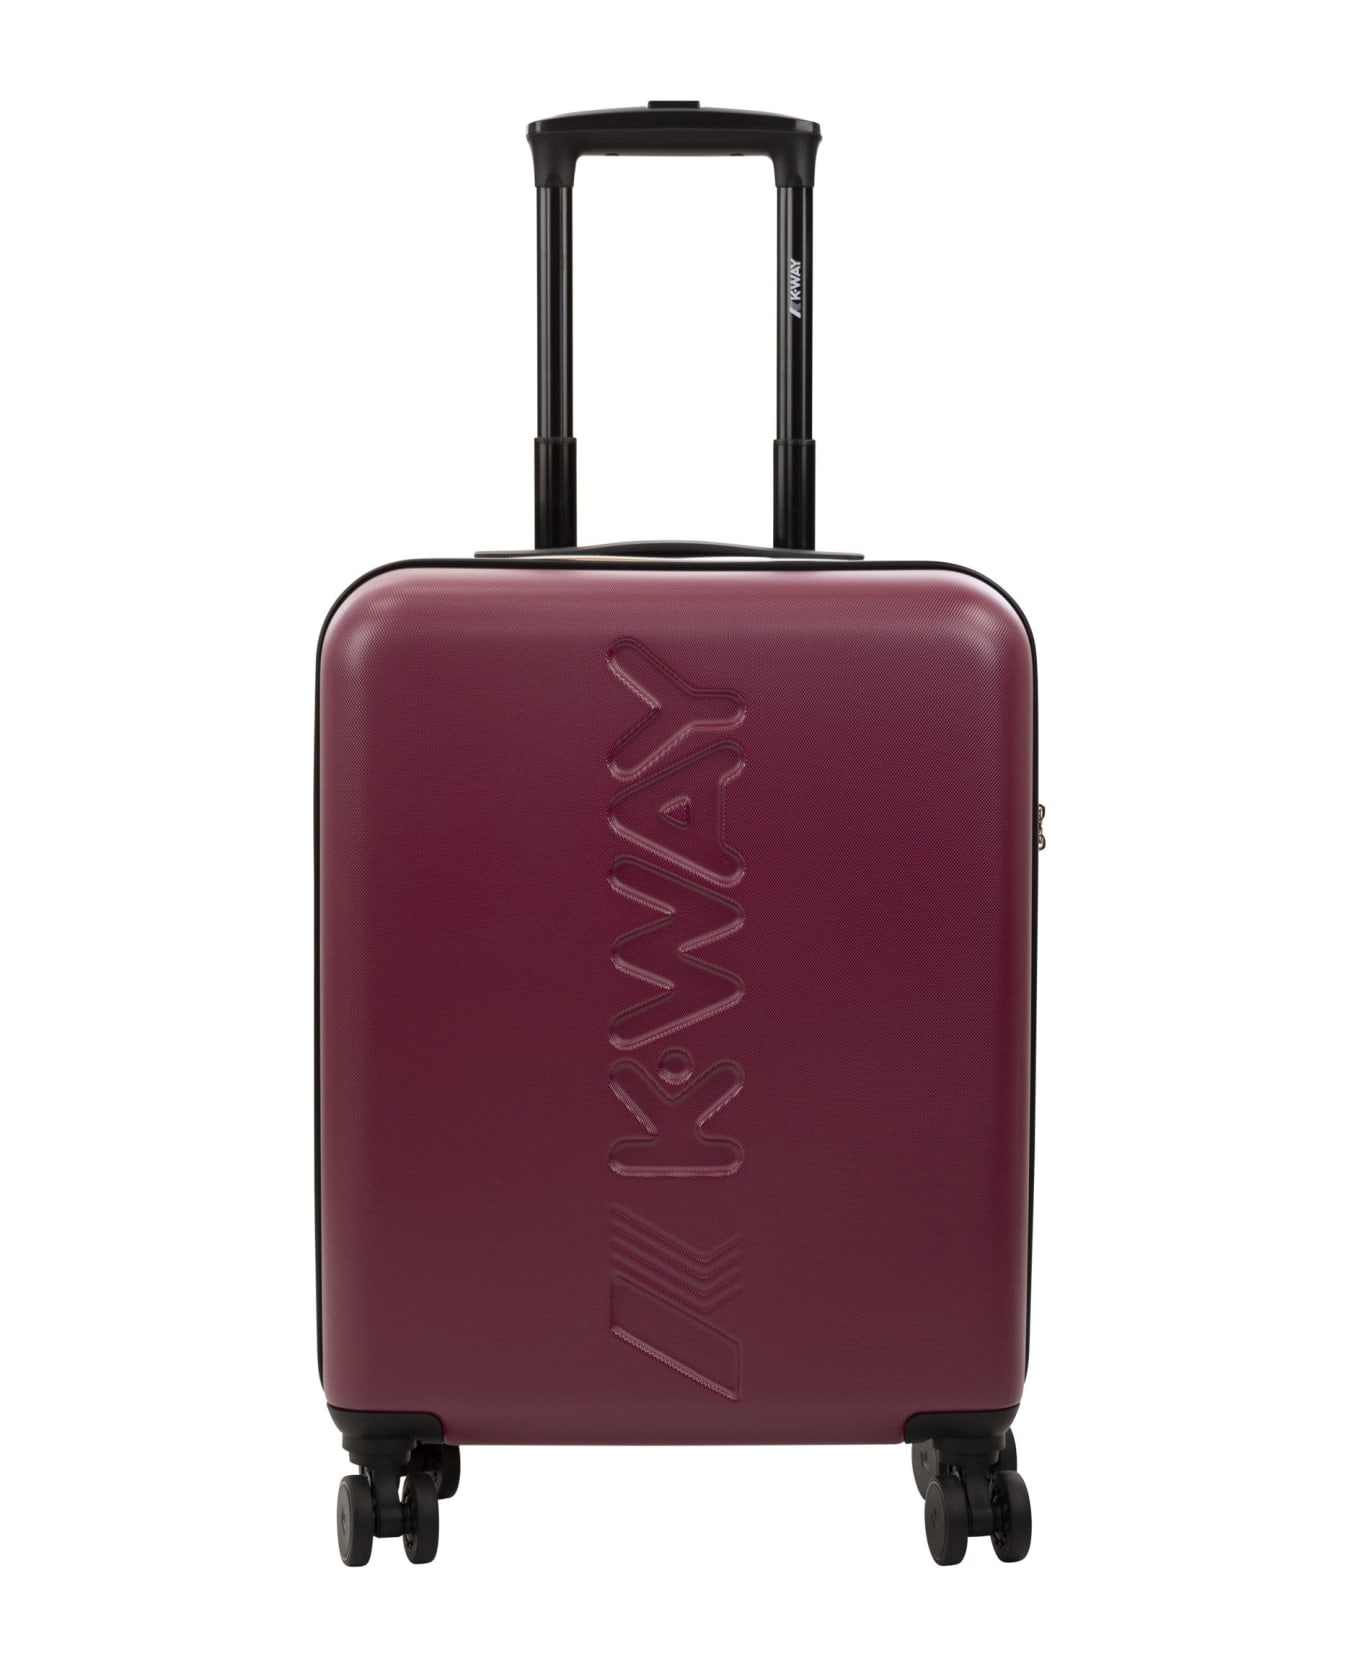 K-Way Trolley Small - Red Dk Blue Md Cobalt